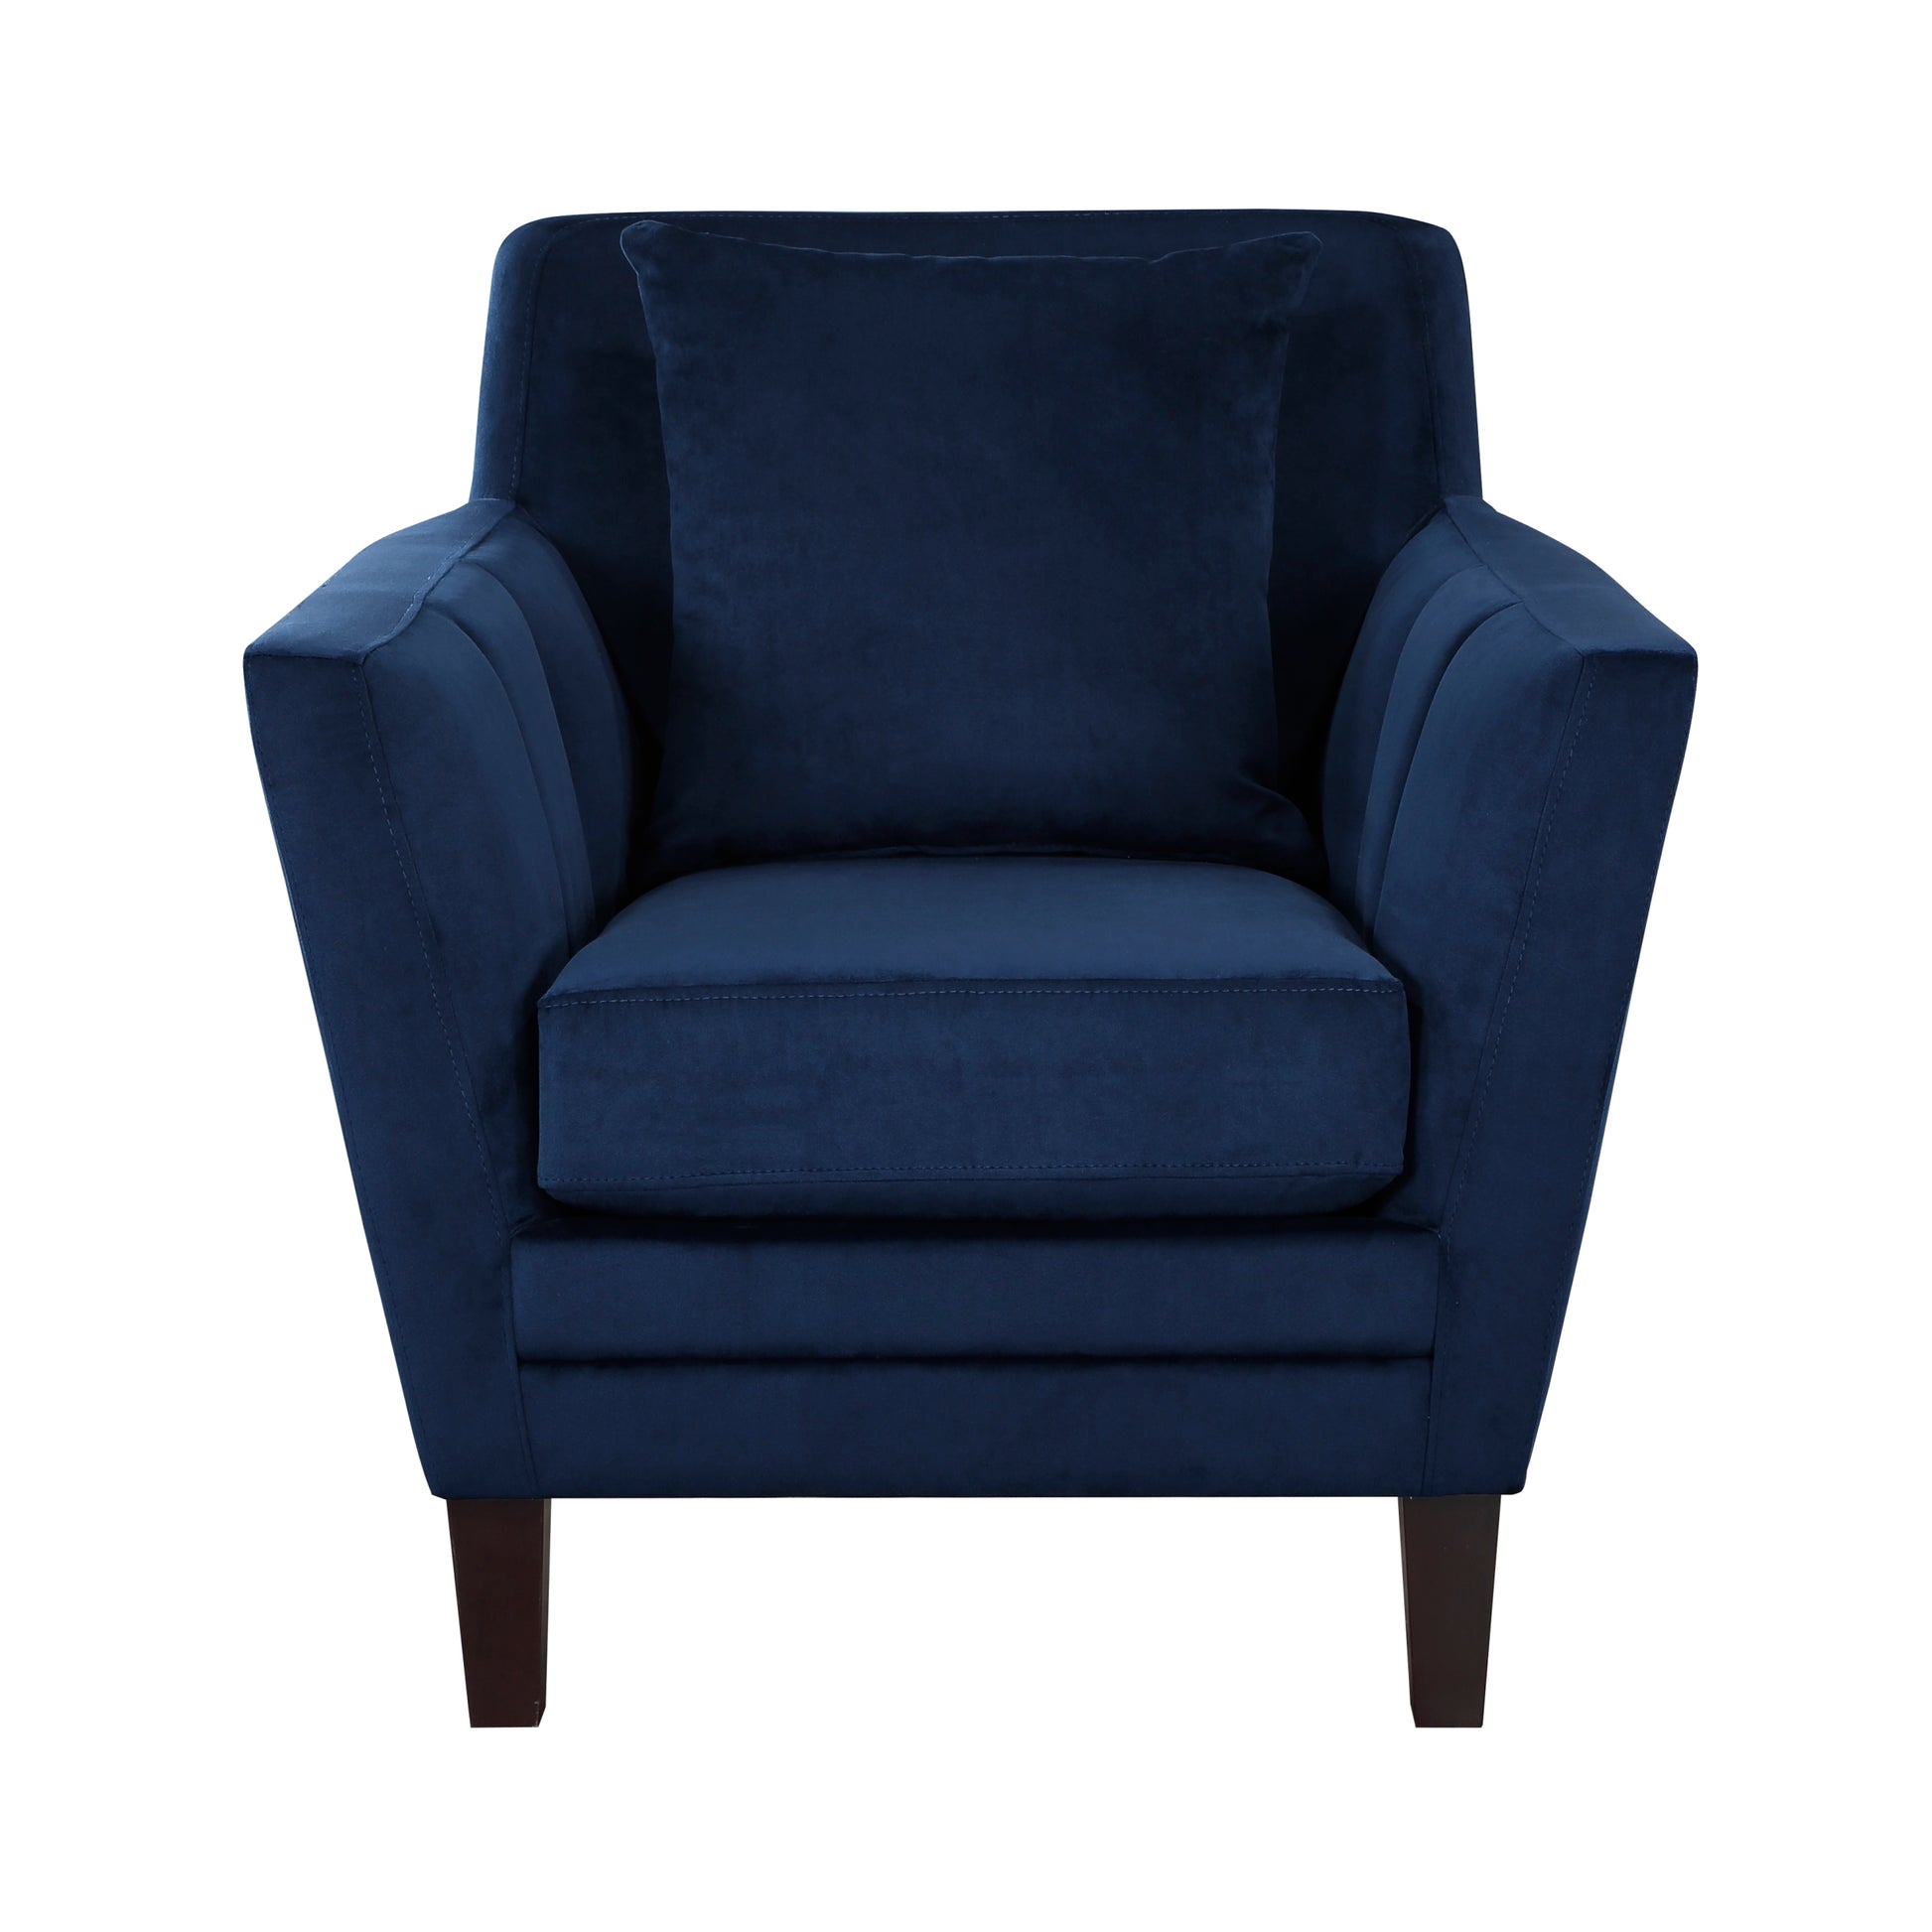 Stylish Home Accent Chair Blue Velvet Upholstery blue-primary living space-modern-solid wood